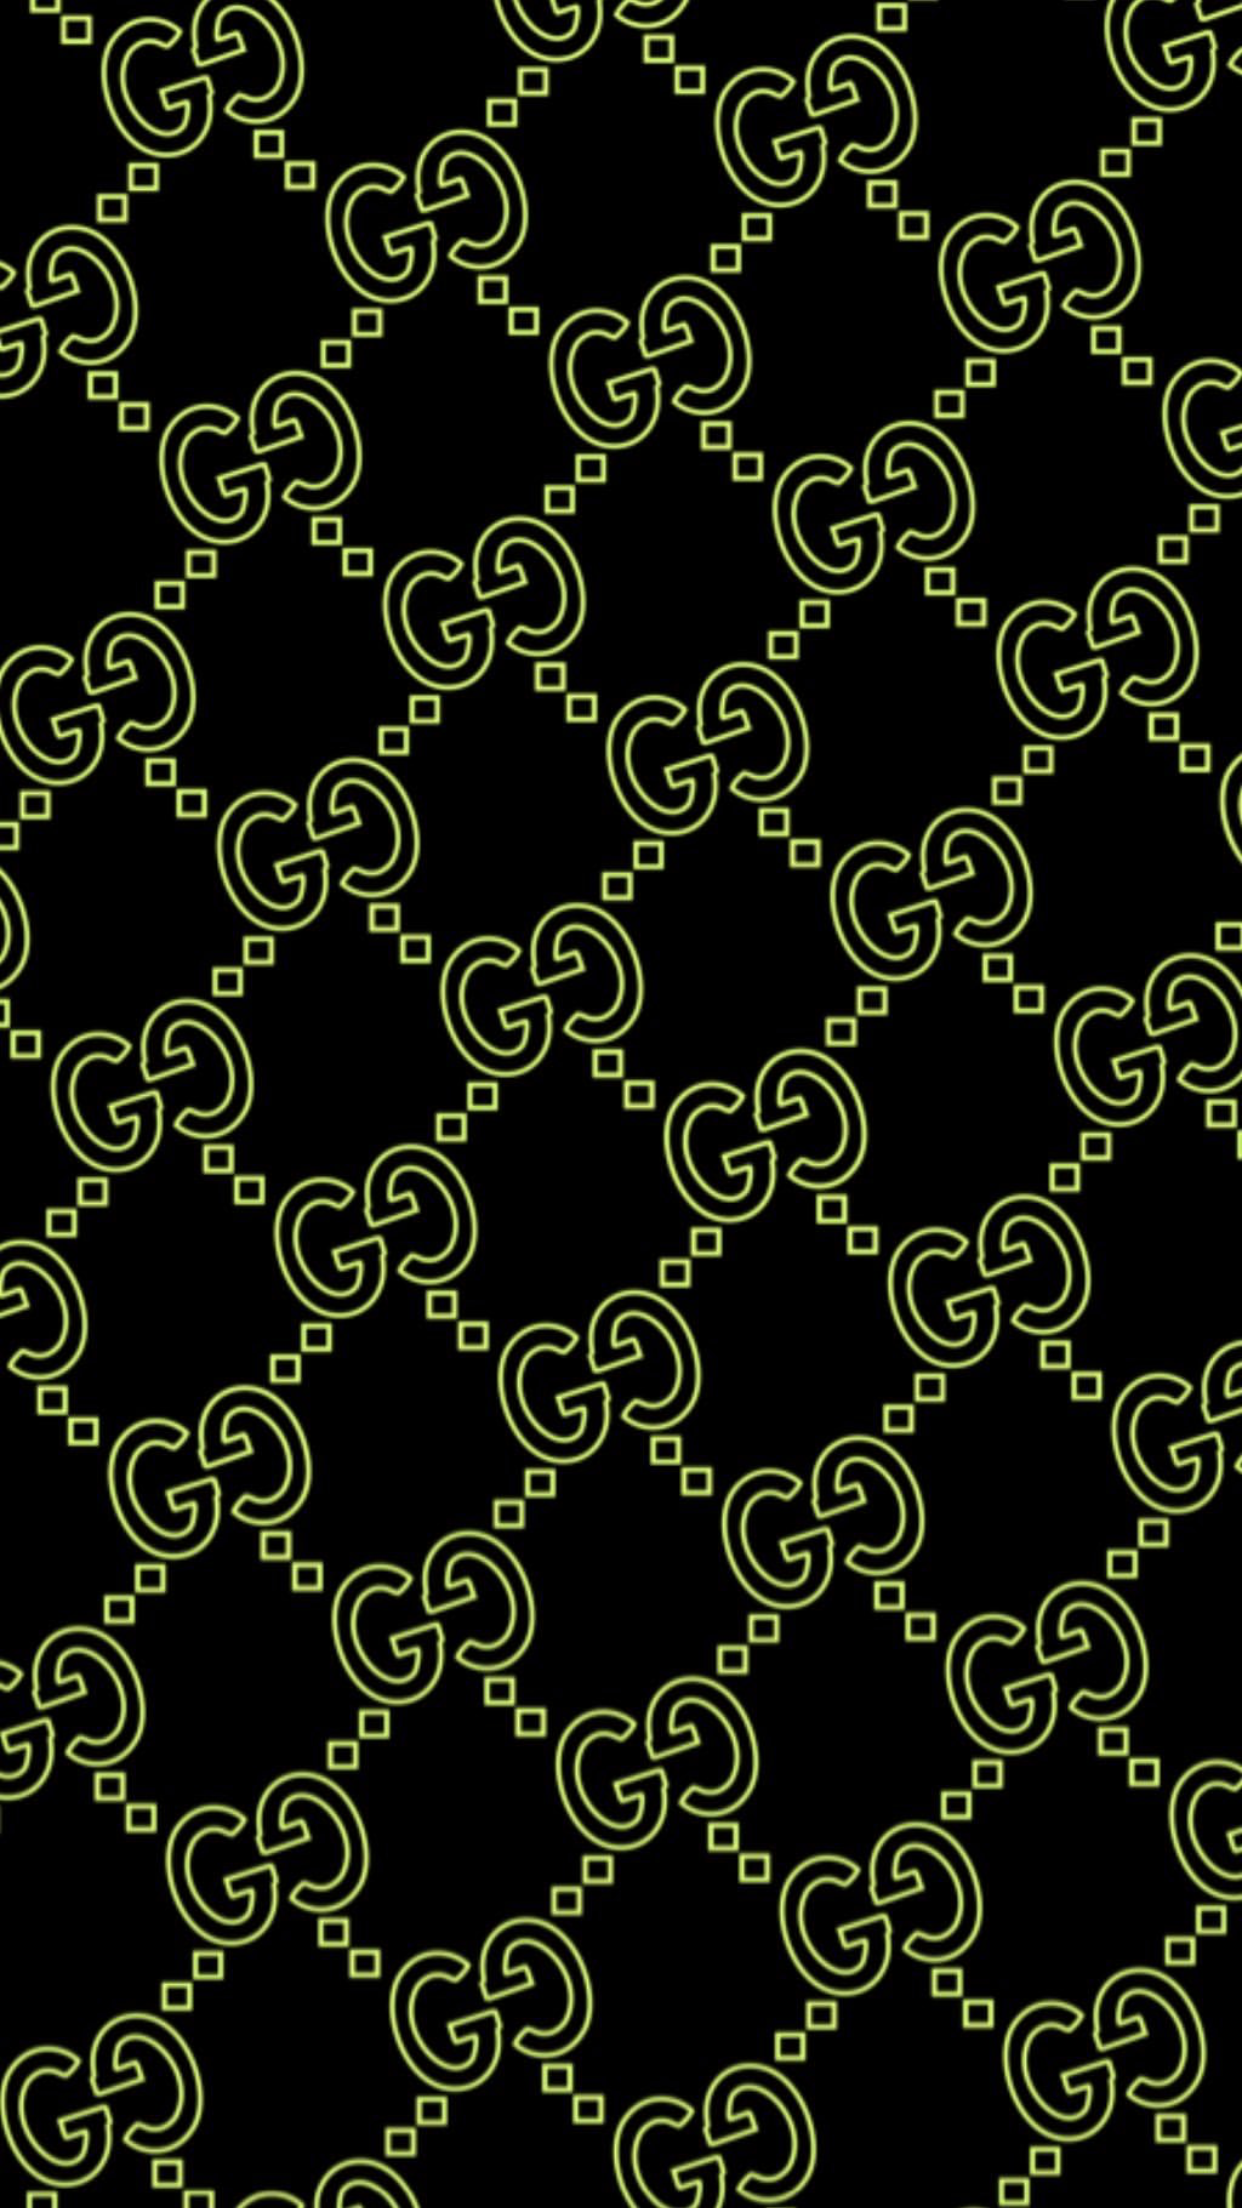 Gucci Live Wallpapers